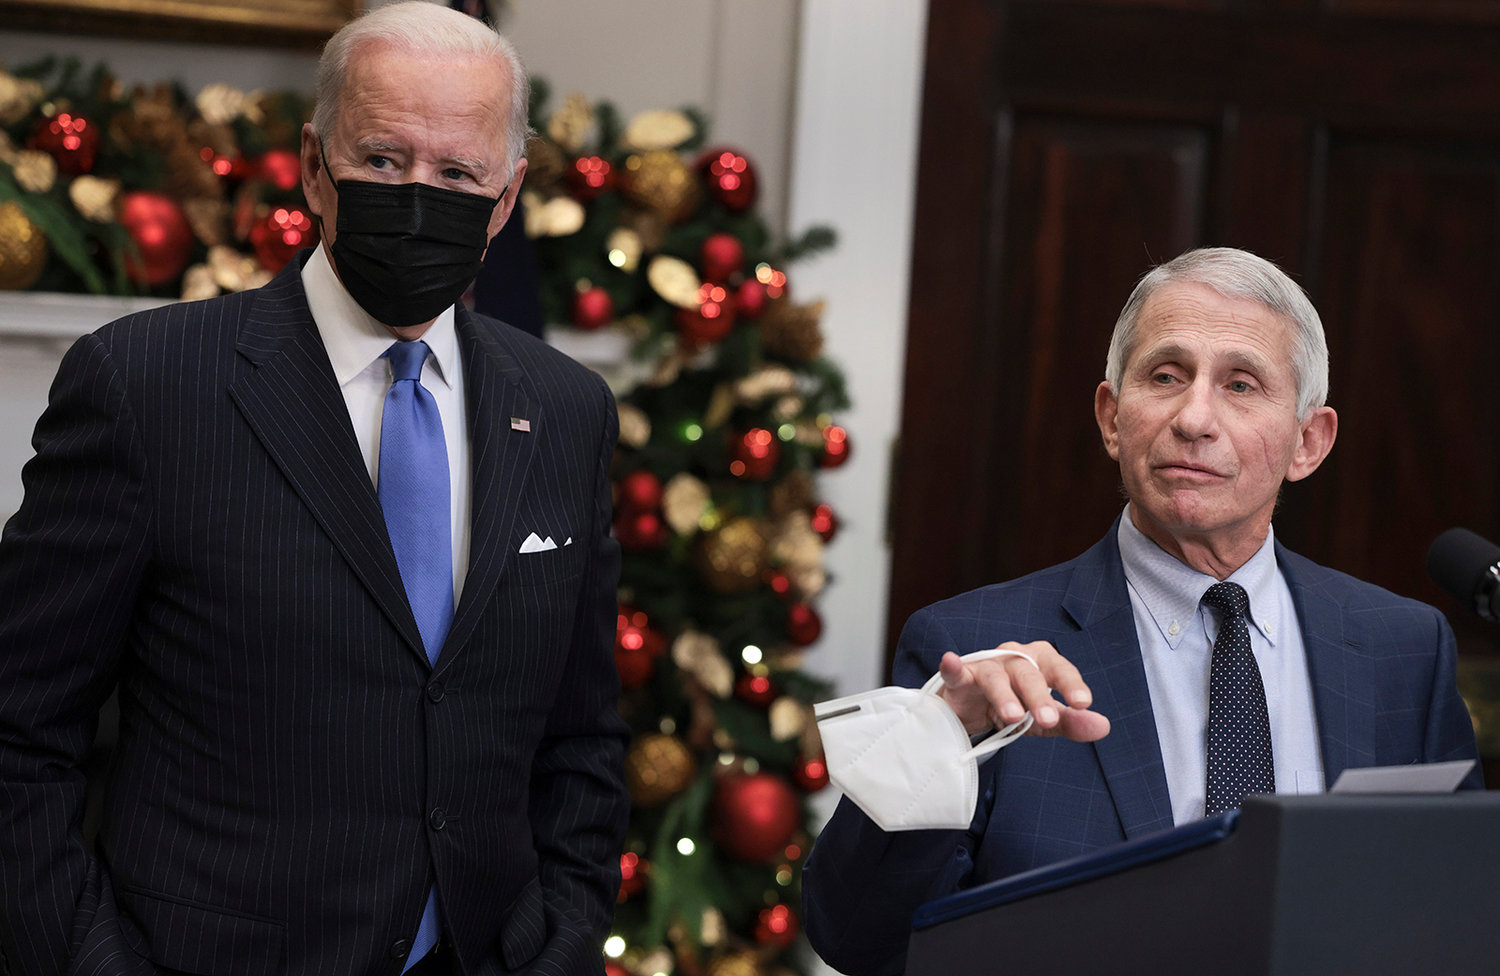 Anthony Fauci (right), Director of the National Institute of Allergy and Infectious Diseases and Chief Medical Advisor to the President, speaks alongside U.S. President Joe Biden as he delivers remarks on the Omicron COVID-19 variant following a meeting of the COVID-19 response team at the White House on Nov. 29, 2021, in Washington, DC. (Anna Moneymaker/Getty Images/TNS)